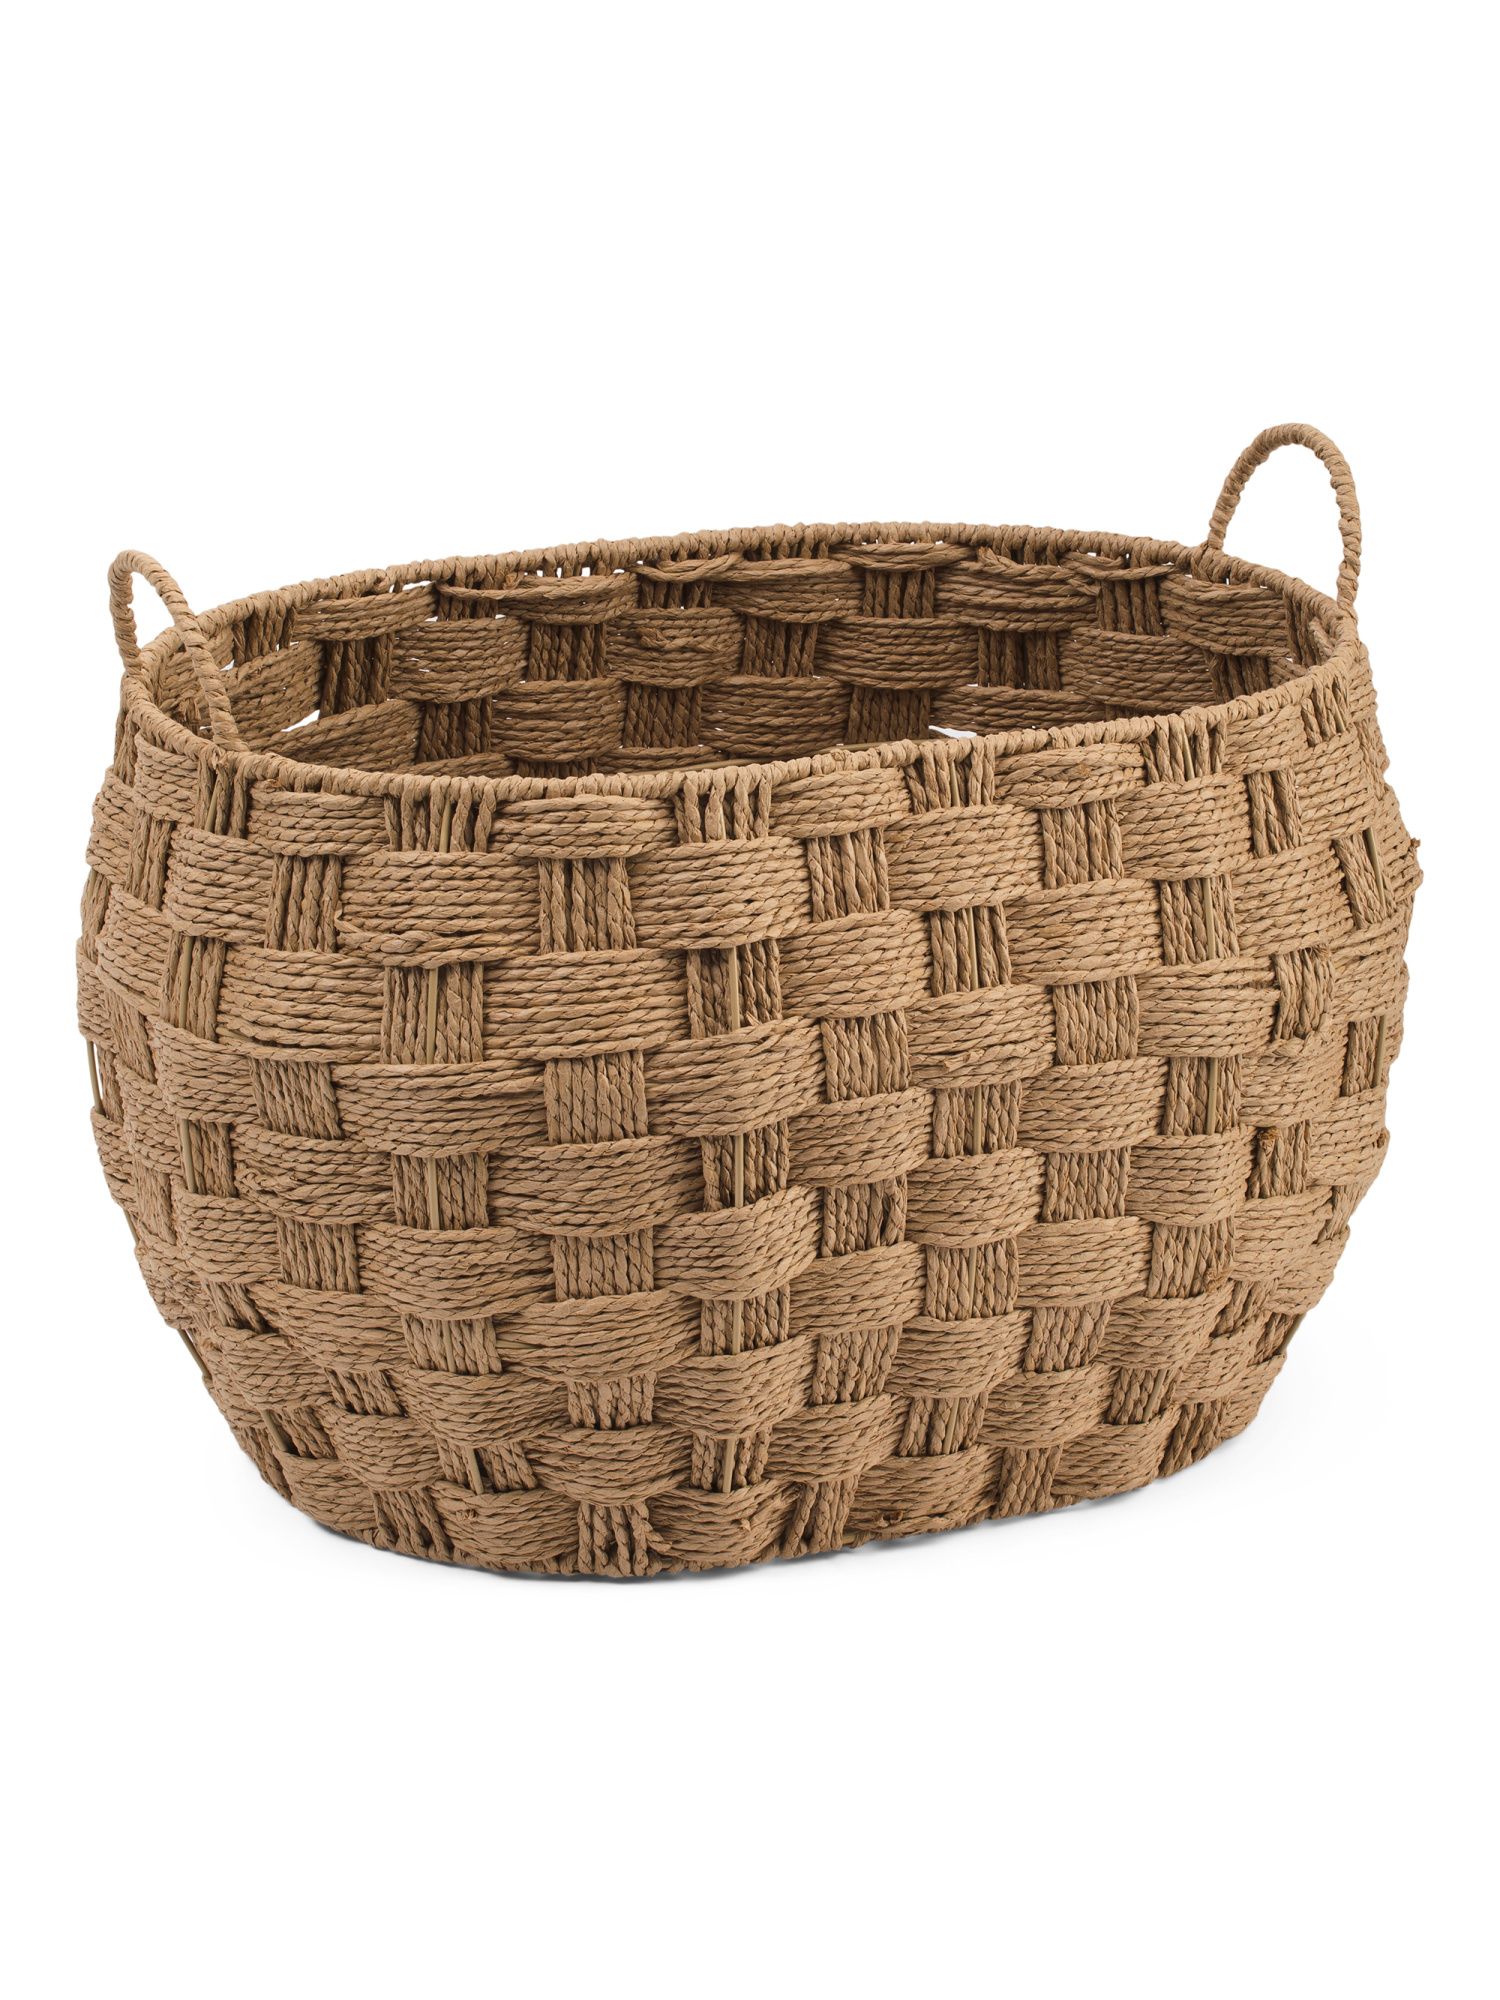 Extra Large Woven Natural Oval Storage Basket | TJ Maxx